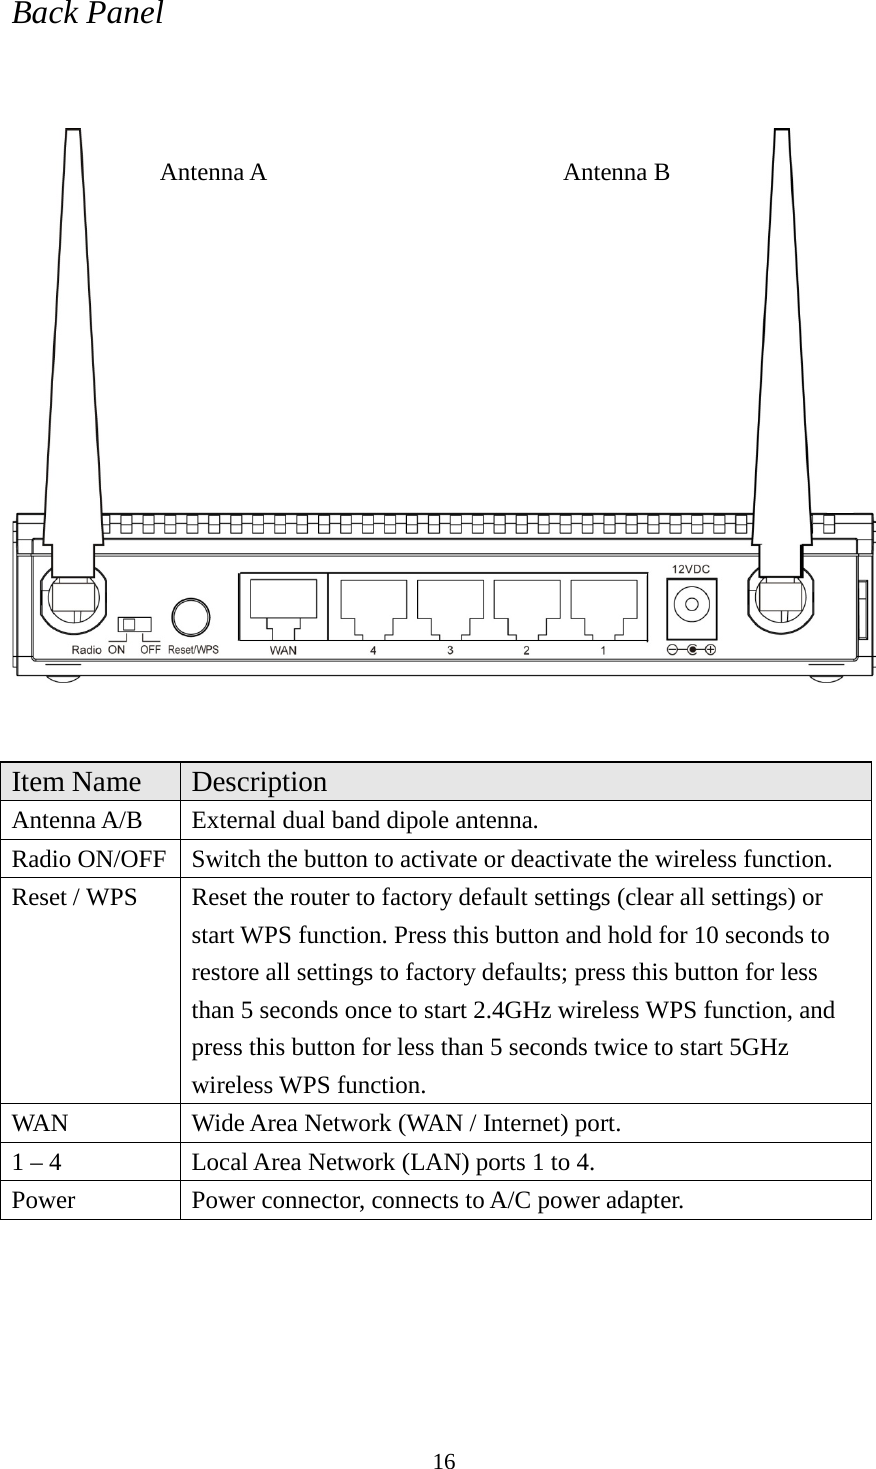 16 Back Panel     Item Name Description Antenna A/B External dual band dipole antenna. Radio ON/OFF  Switch the button to activate or deactivate the wireless function. Reset / WPS Reset the router to factory default settings (clear all settings) or start WPS function. Press this button and hold for 10 seconds to restore all settings to factory defaults; press this button for less than 5 seconds once to start 2.4GHz wireless WPS function, and press this button for less than 5 seconds twice to start 5GHz wireless WPS function. WAN Wide Area Network (WAN / Internet) port. 1 – 4  Local Area Network (LAN) ports 1 to 4. Power  Power connector, connects to A/C power adapter.      Antenna A Antenna B 